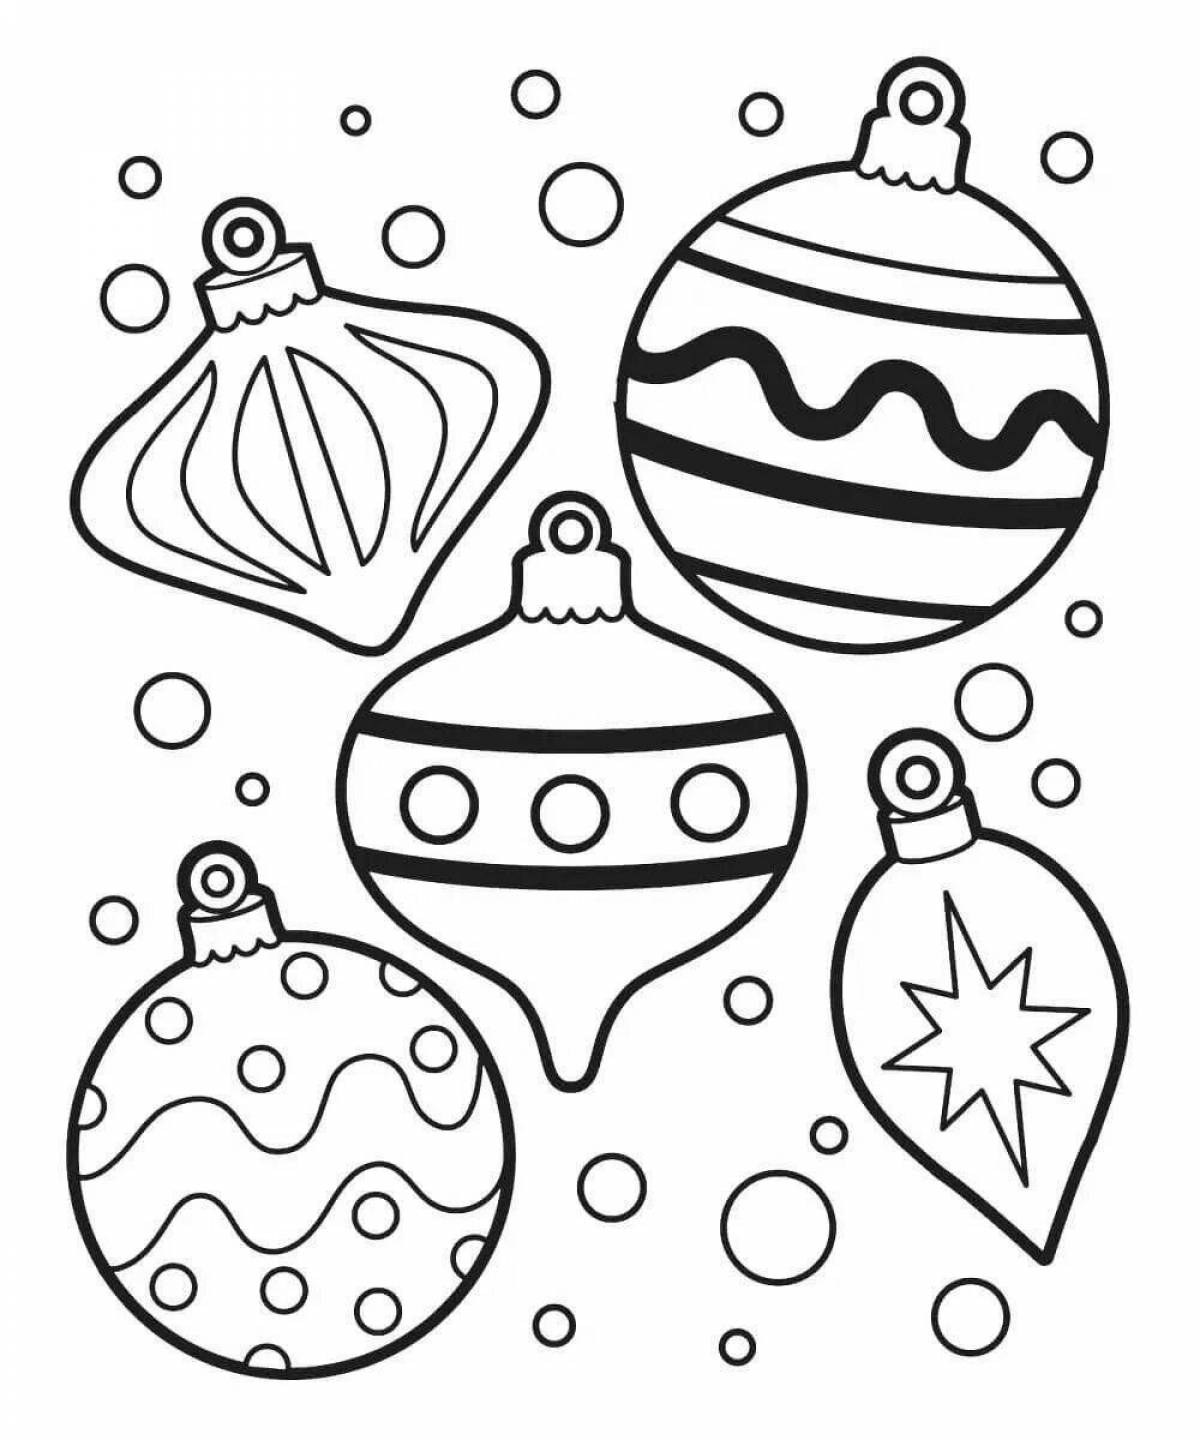 Sparkling Christmas ball coloring book for kids